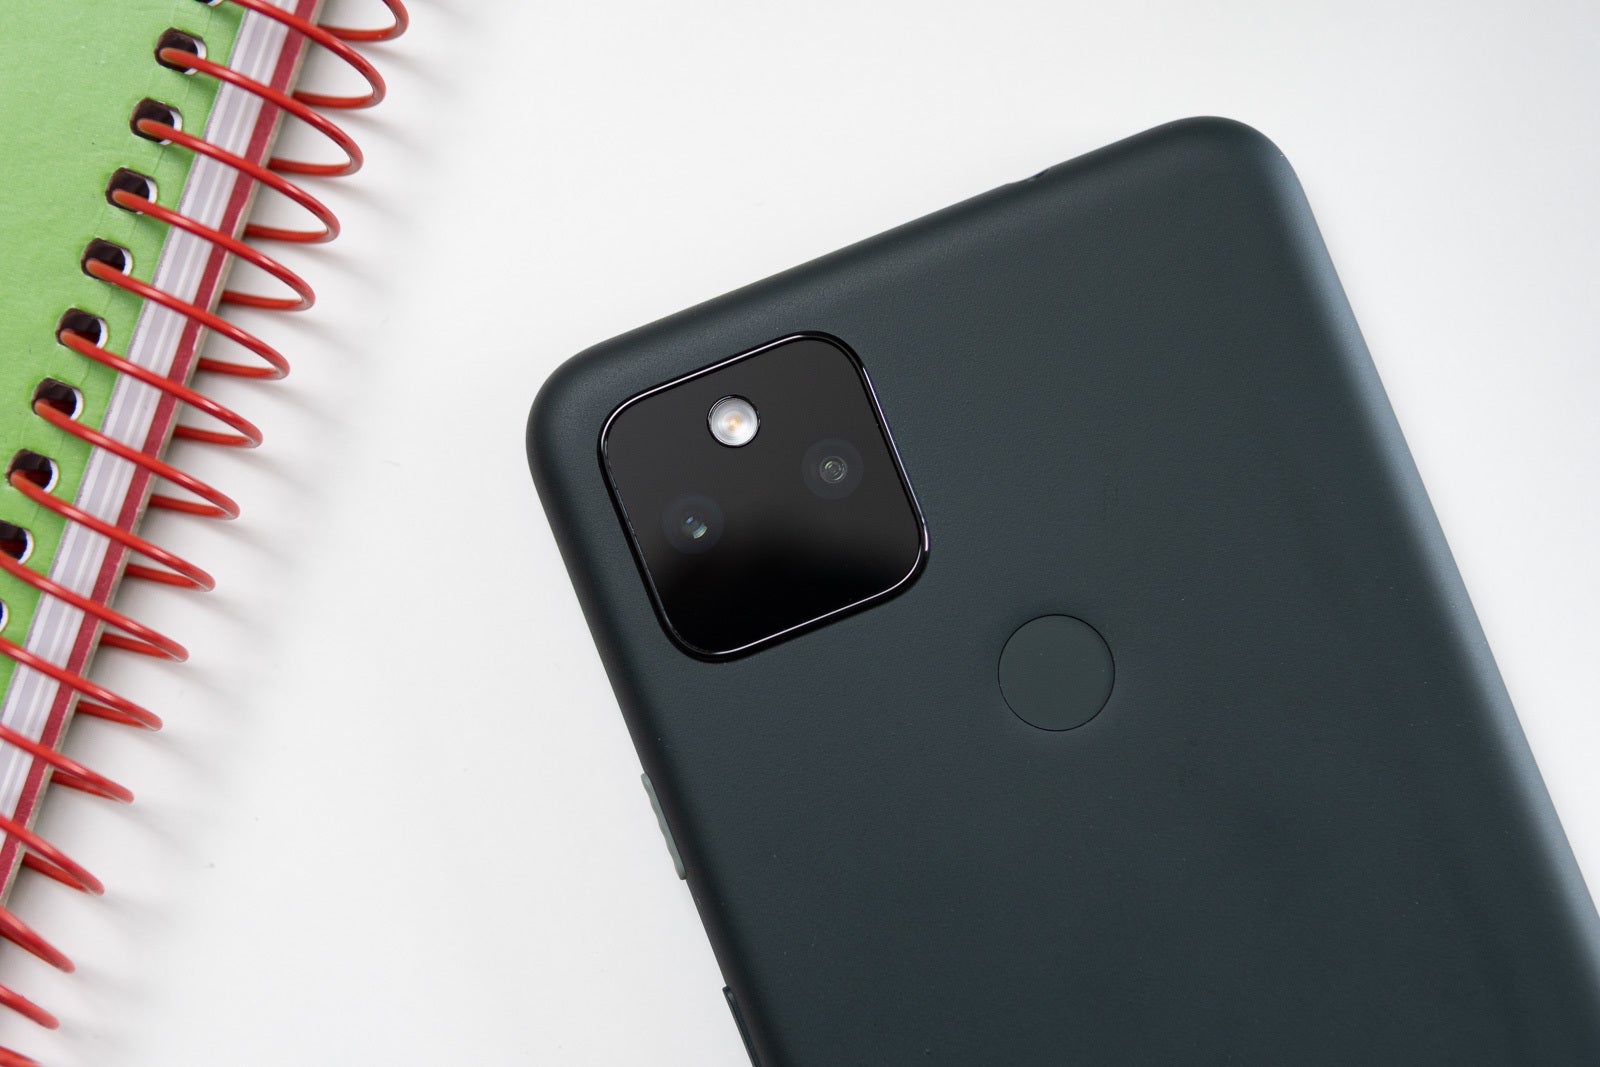 Google Pixel 5a Review: Boring looks hide an outstanding budget phone